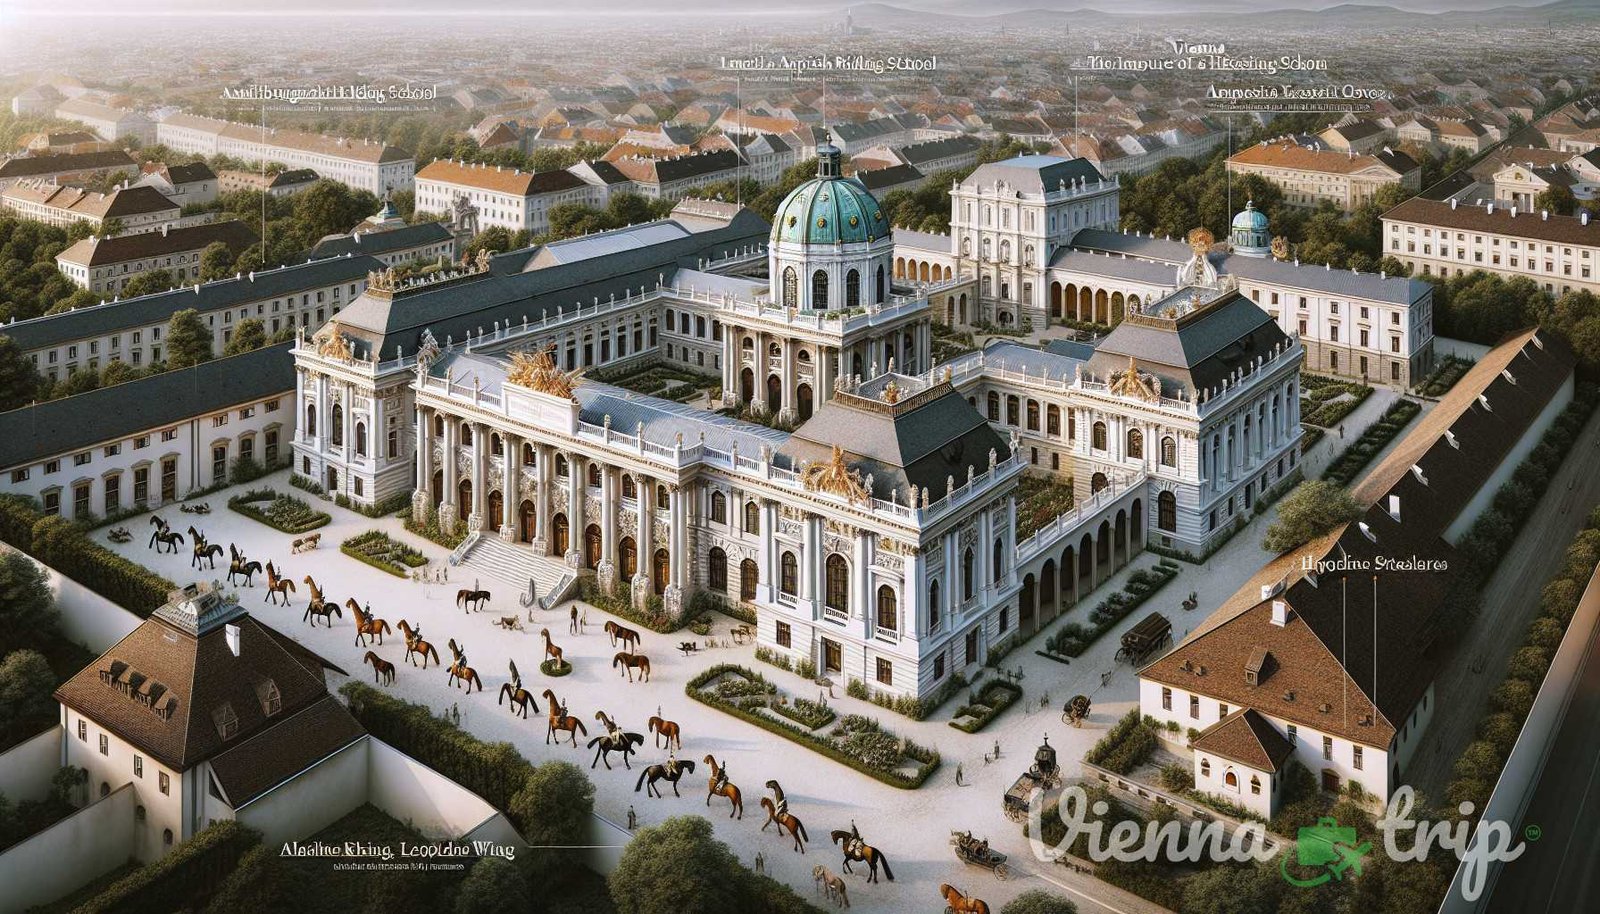 Illustration for section: The Amalienburg: Built in the 18th century, this wing accommodates the Spanish Riding School and the - hofburg vienna